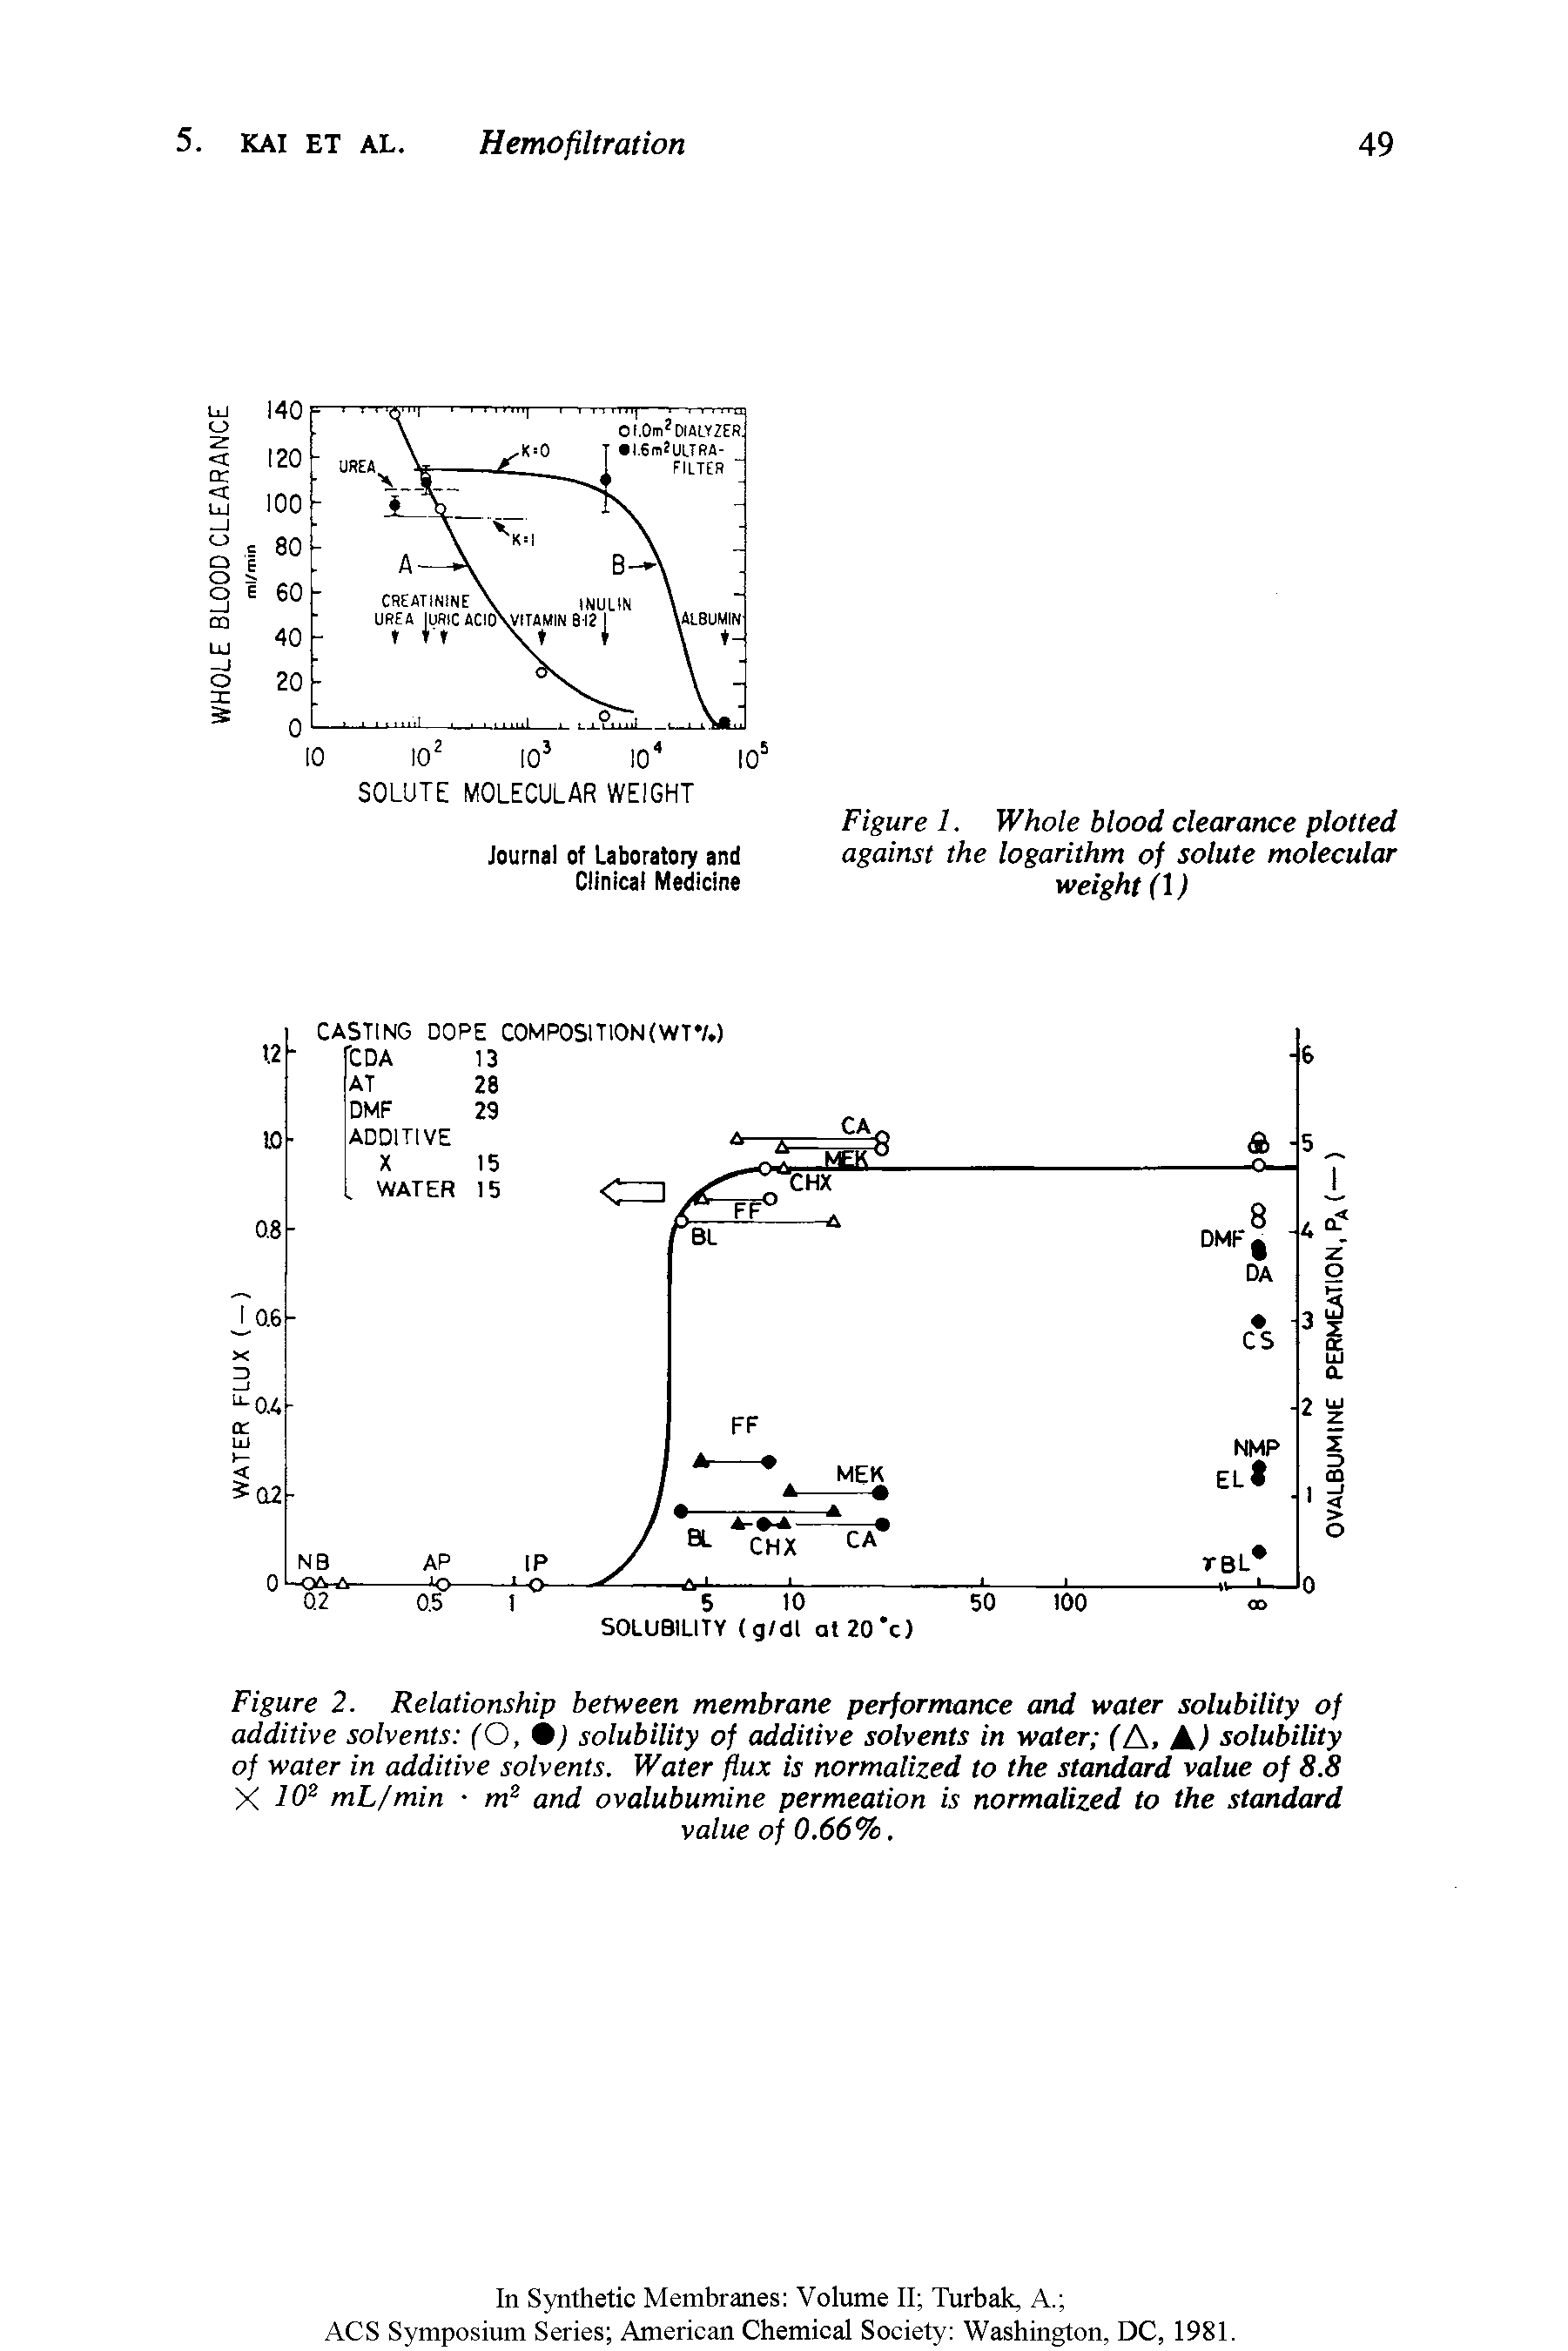 Figure 2. Relationship between membrane performance and water solubility of additive solvents (O, 0J solubility of additive solvents in water fA, ik) solubility of water in additive solvents. Water flux is normalized to the staridard value of 8.8 X 10 mL/min m and ovalubumine permeation is normalized to the standard...